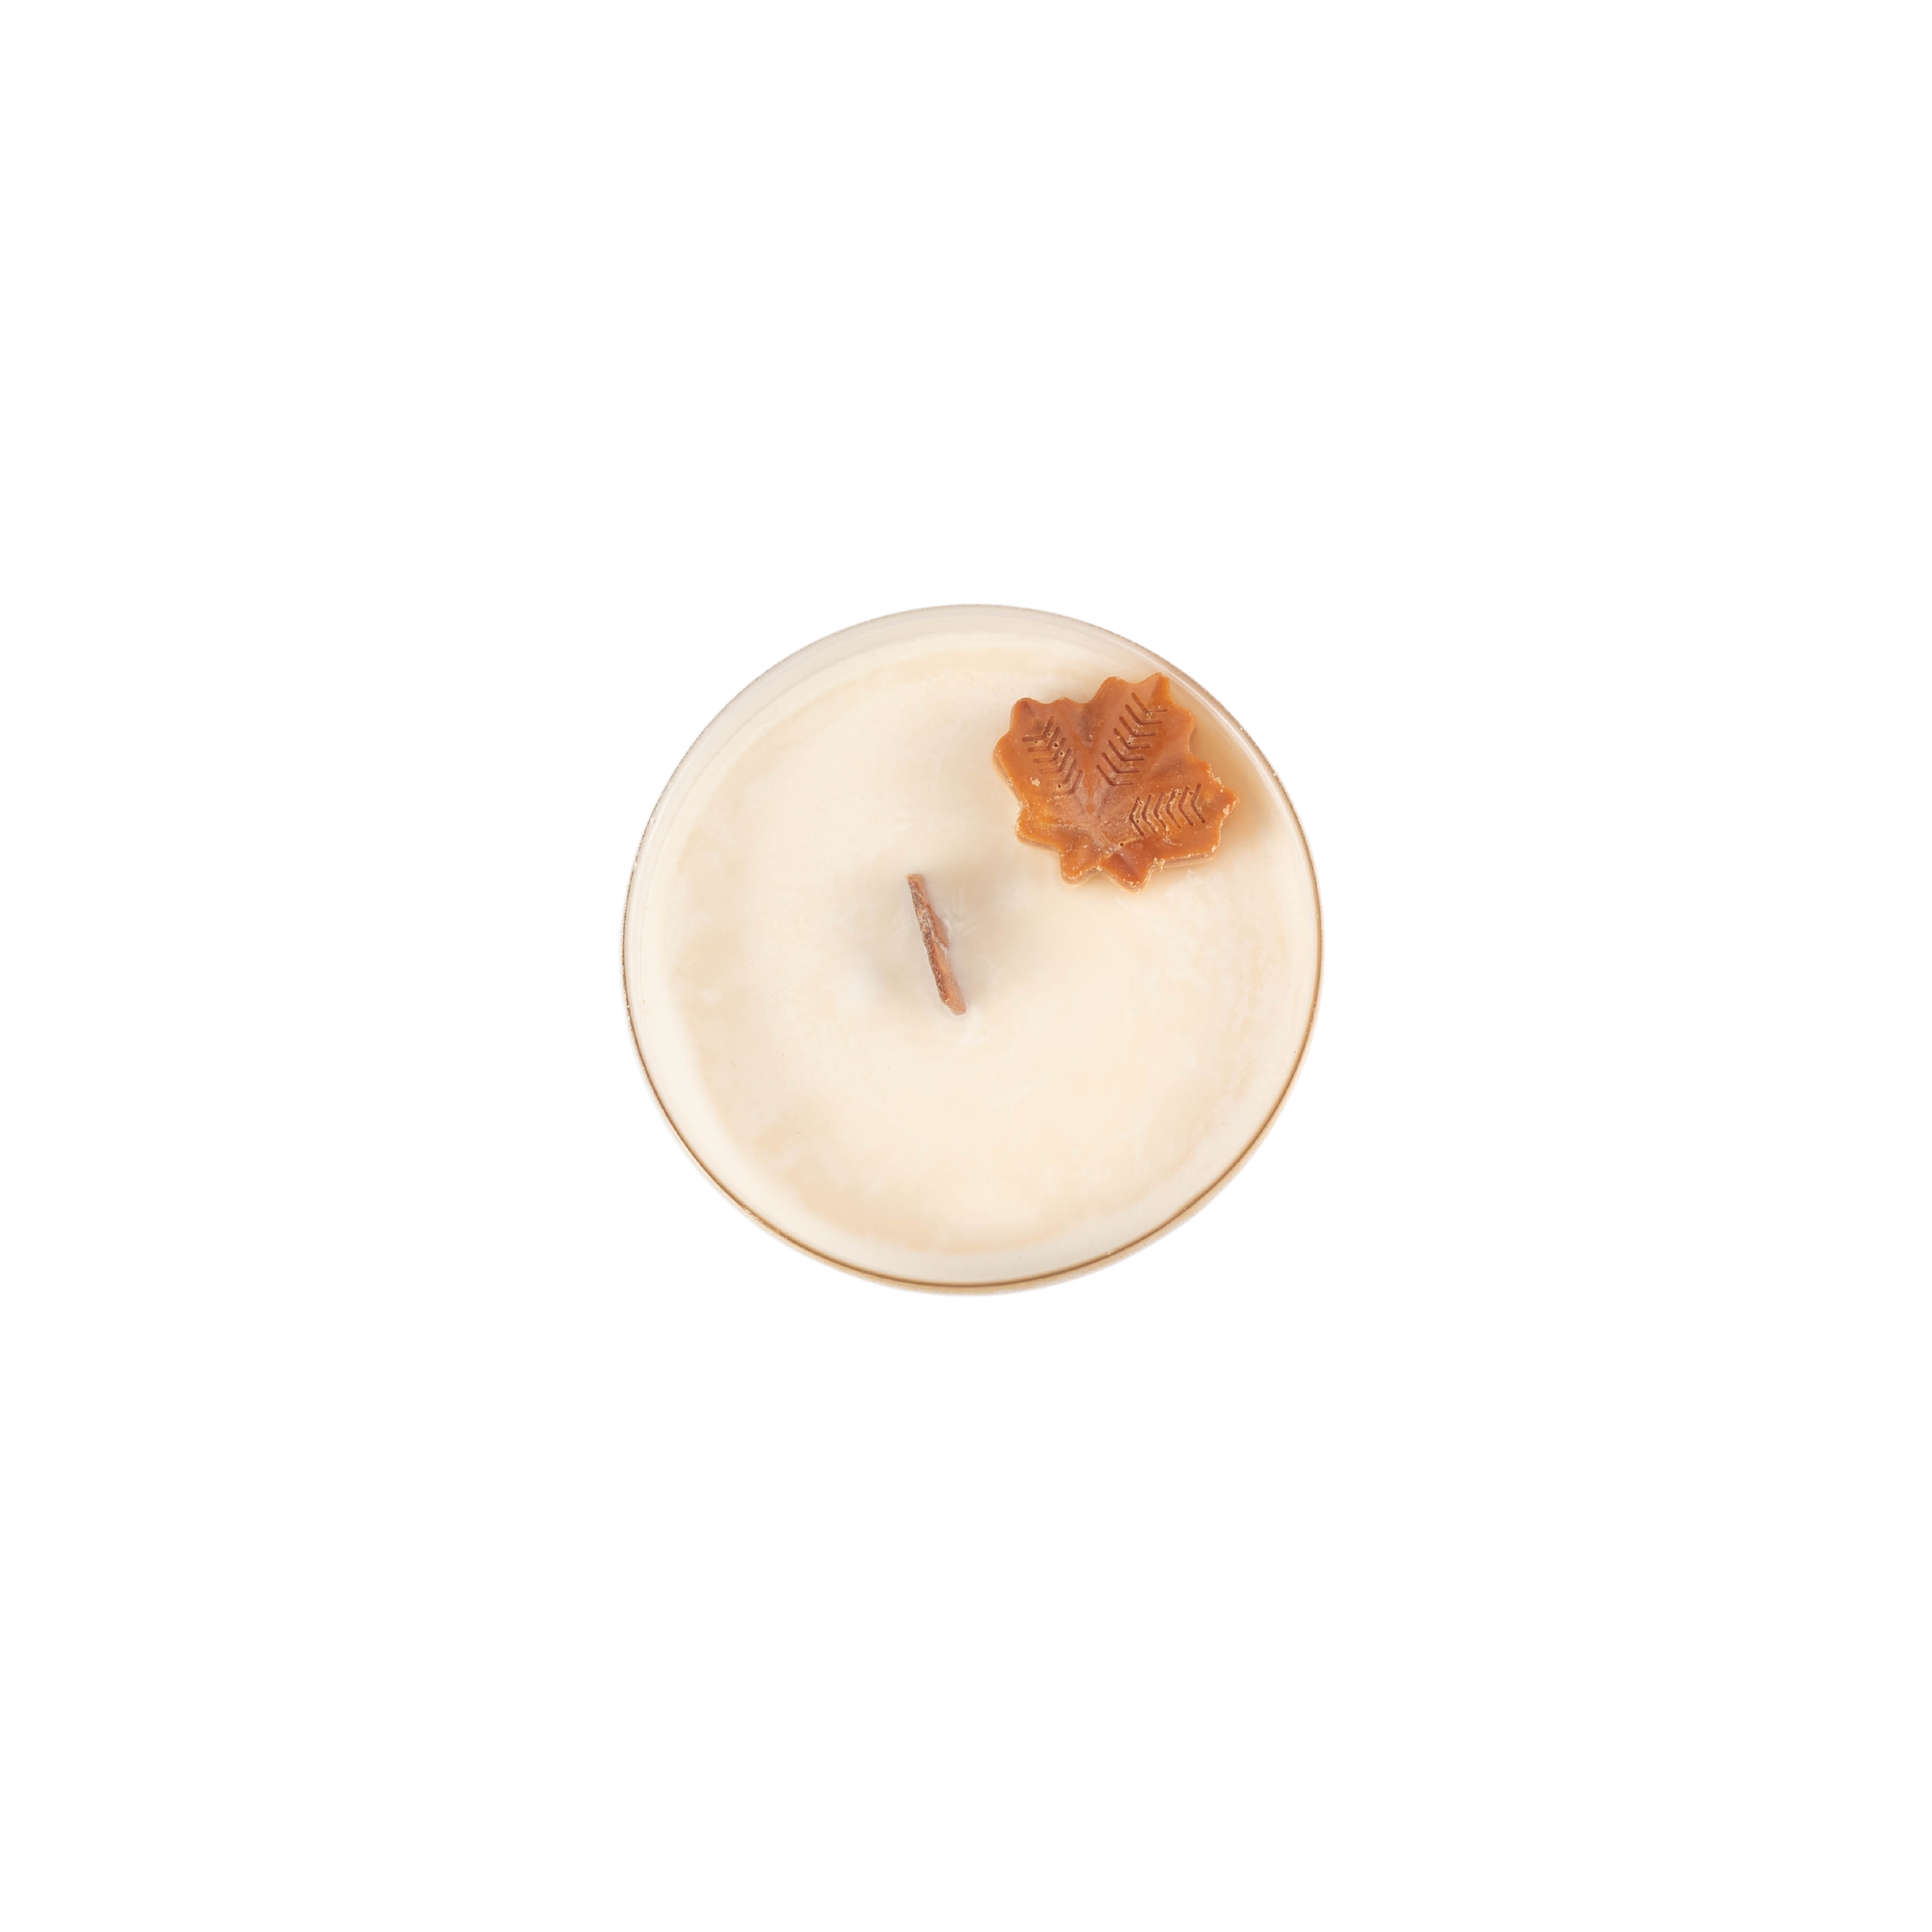 Soy candle - Maple